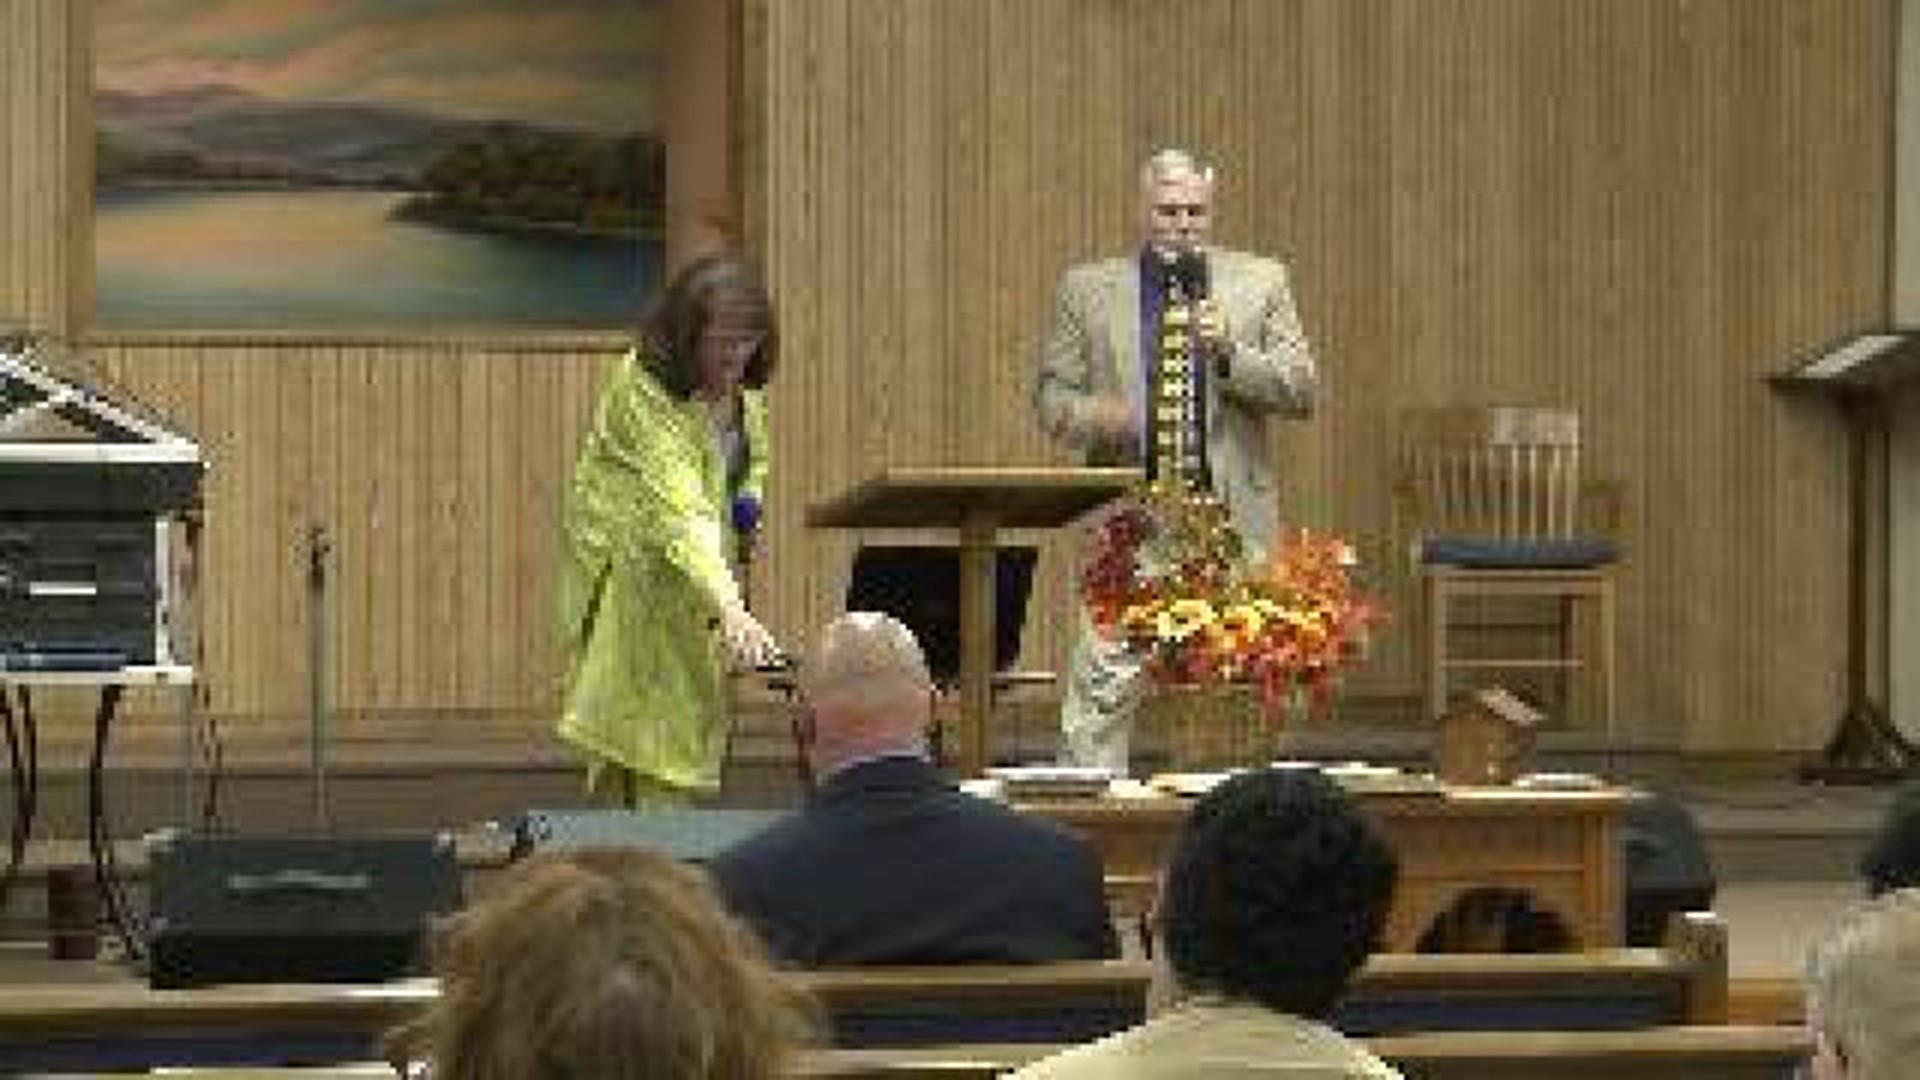 A River Valley church celebrates 100 years